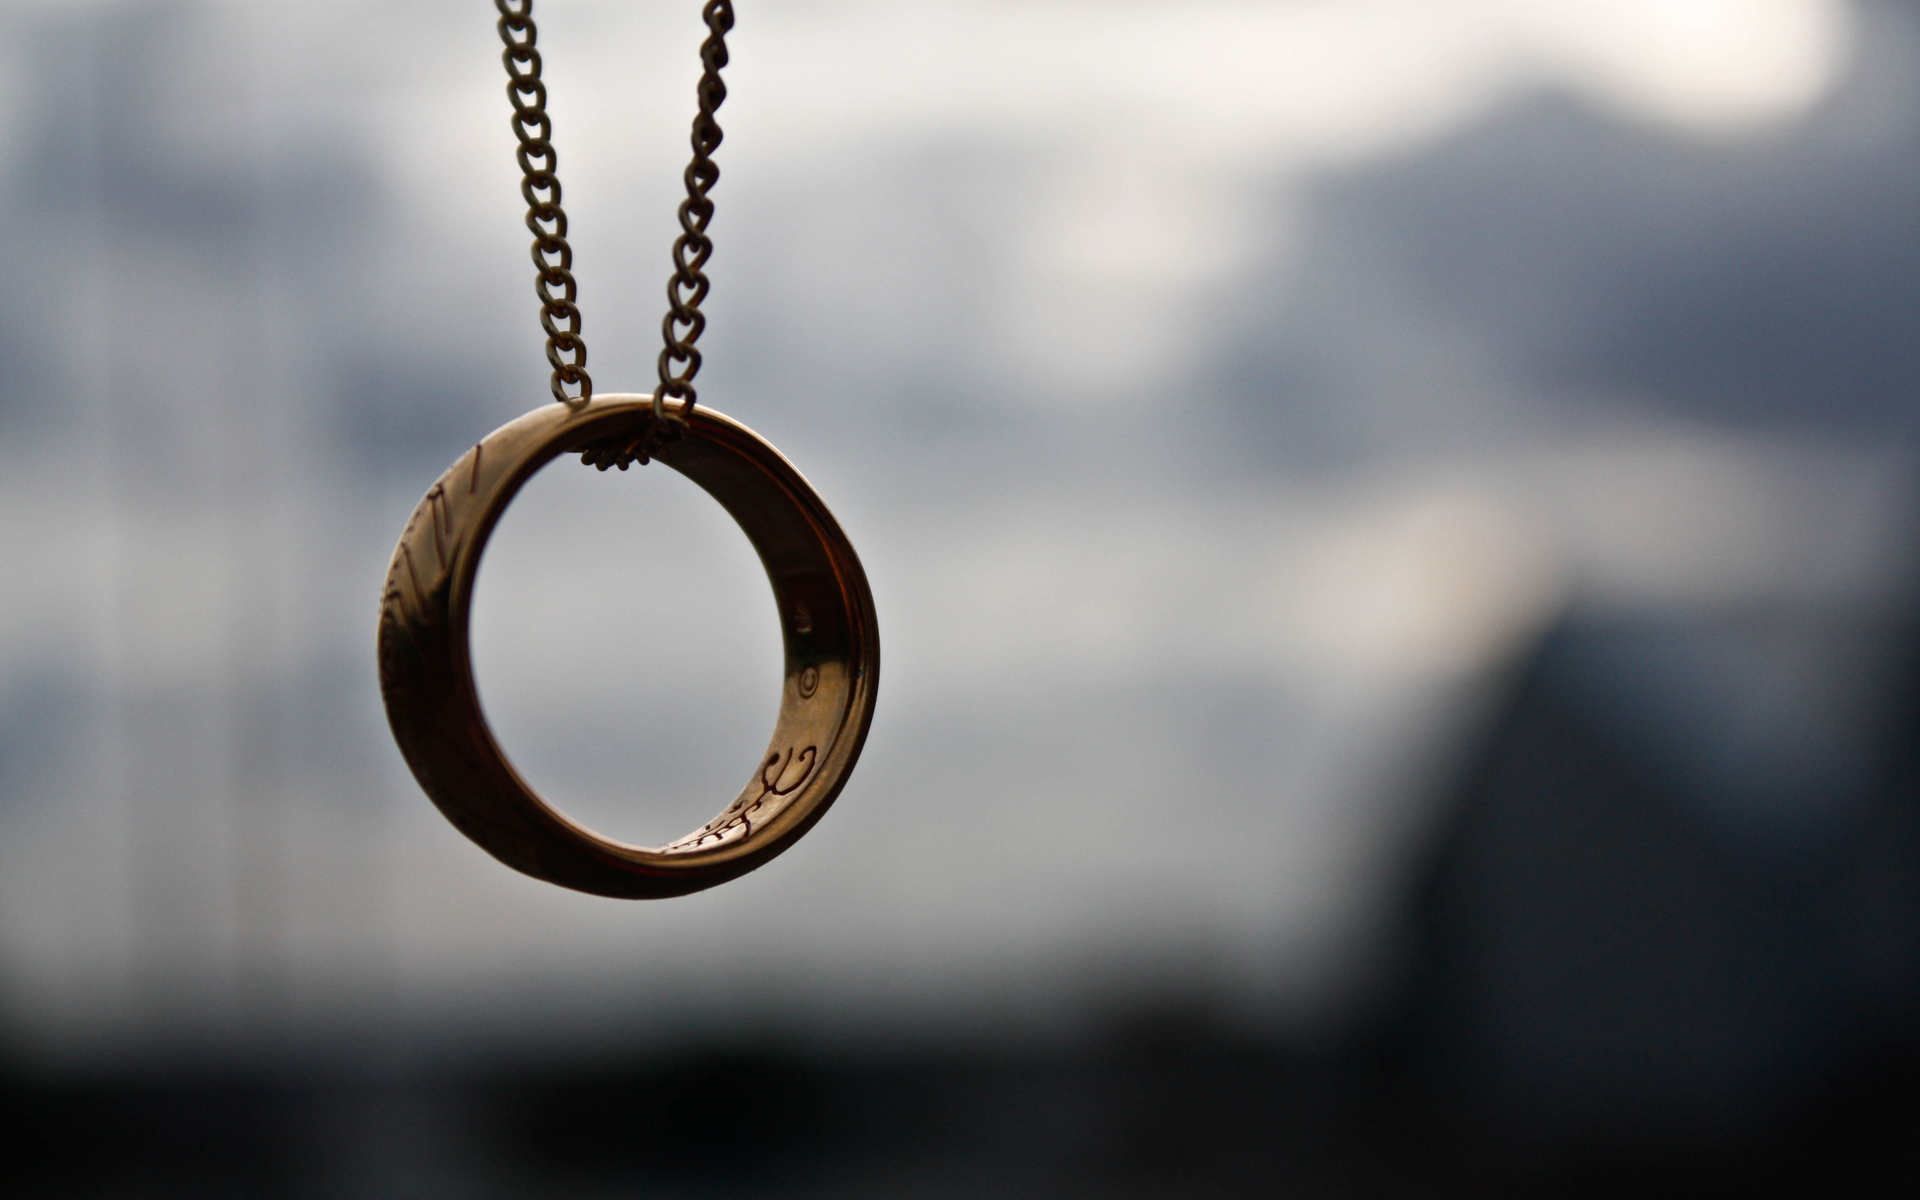 Rings The Lord Of The Rings Bokeh Necklace Closeup Movies Books J R R Tolkien The One Ring 1920x1200